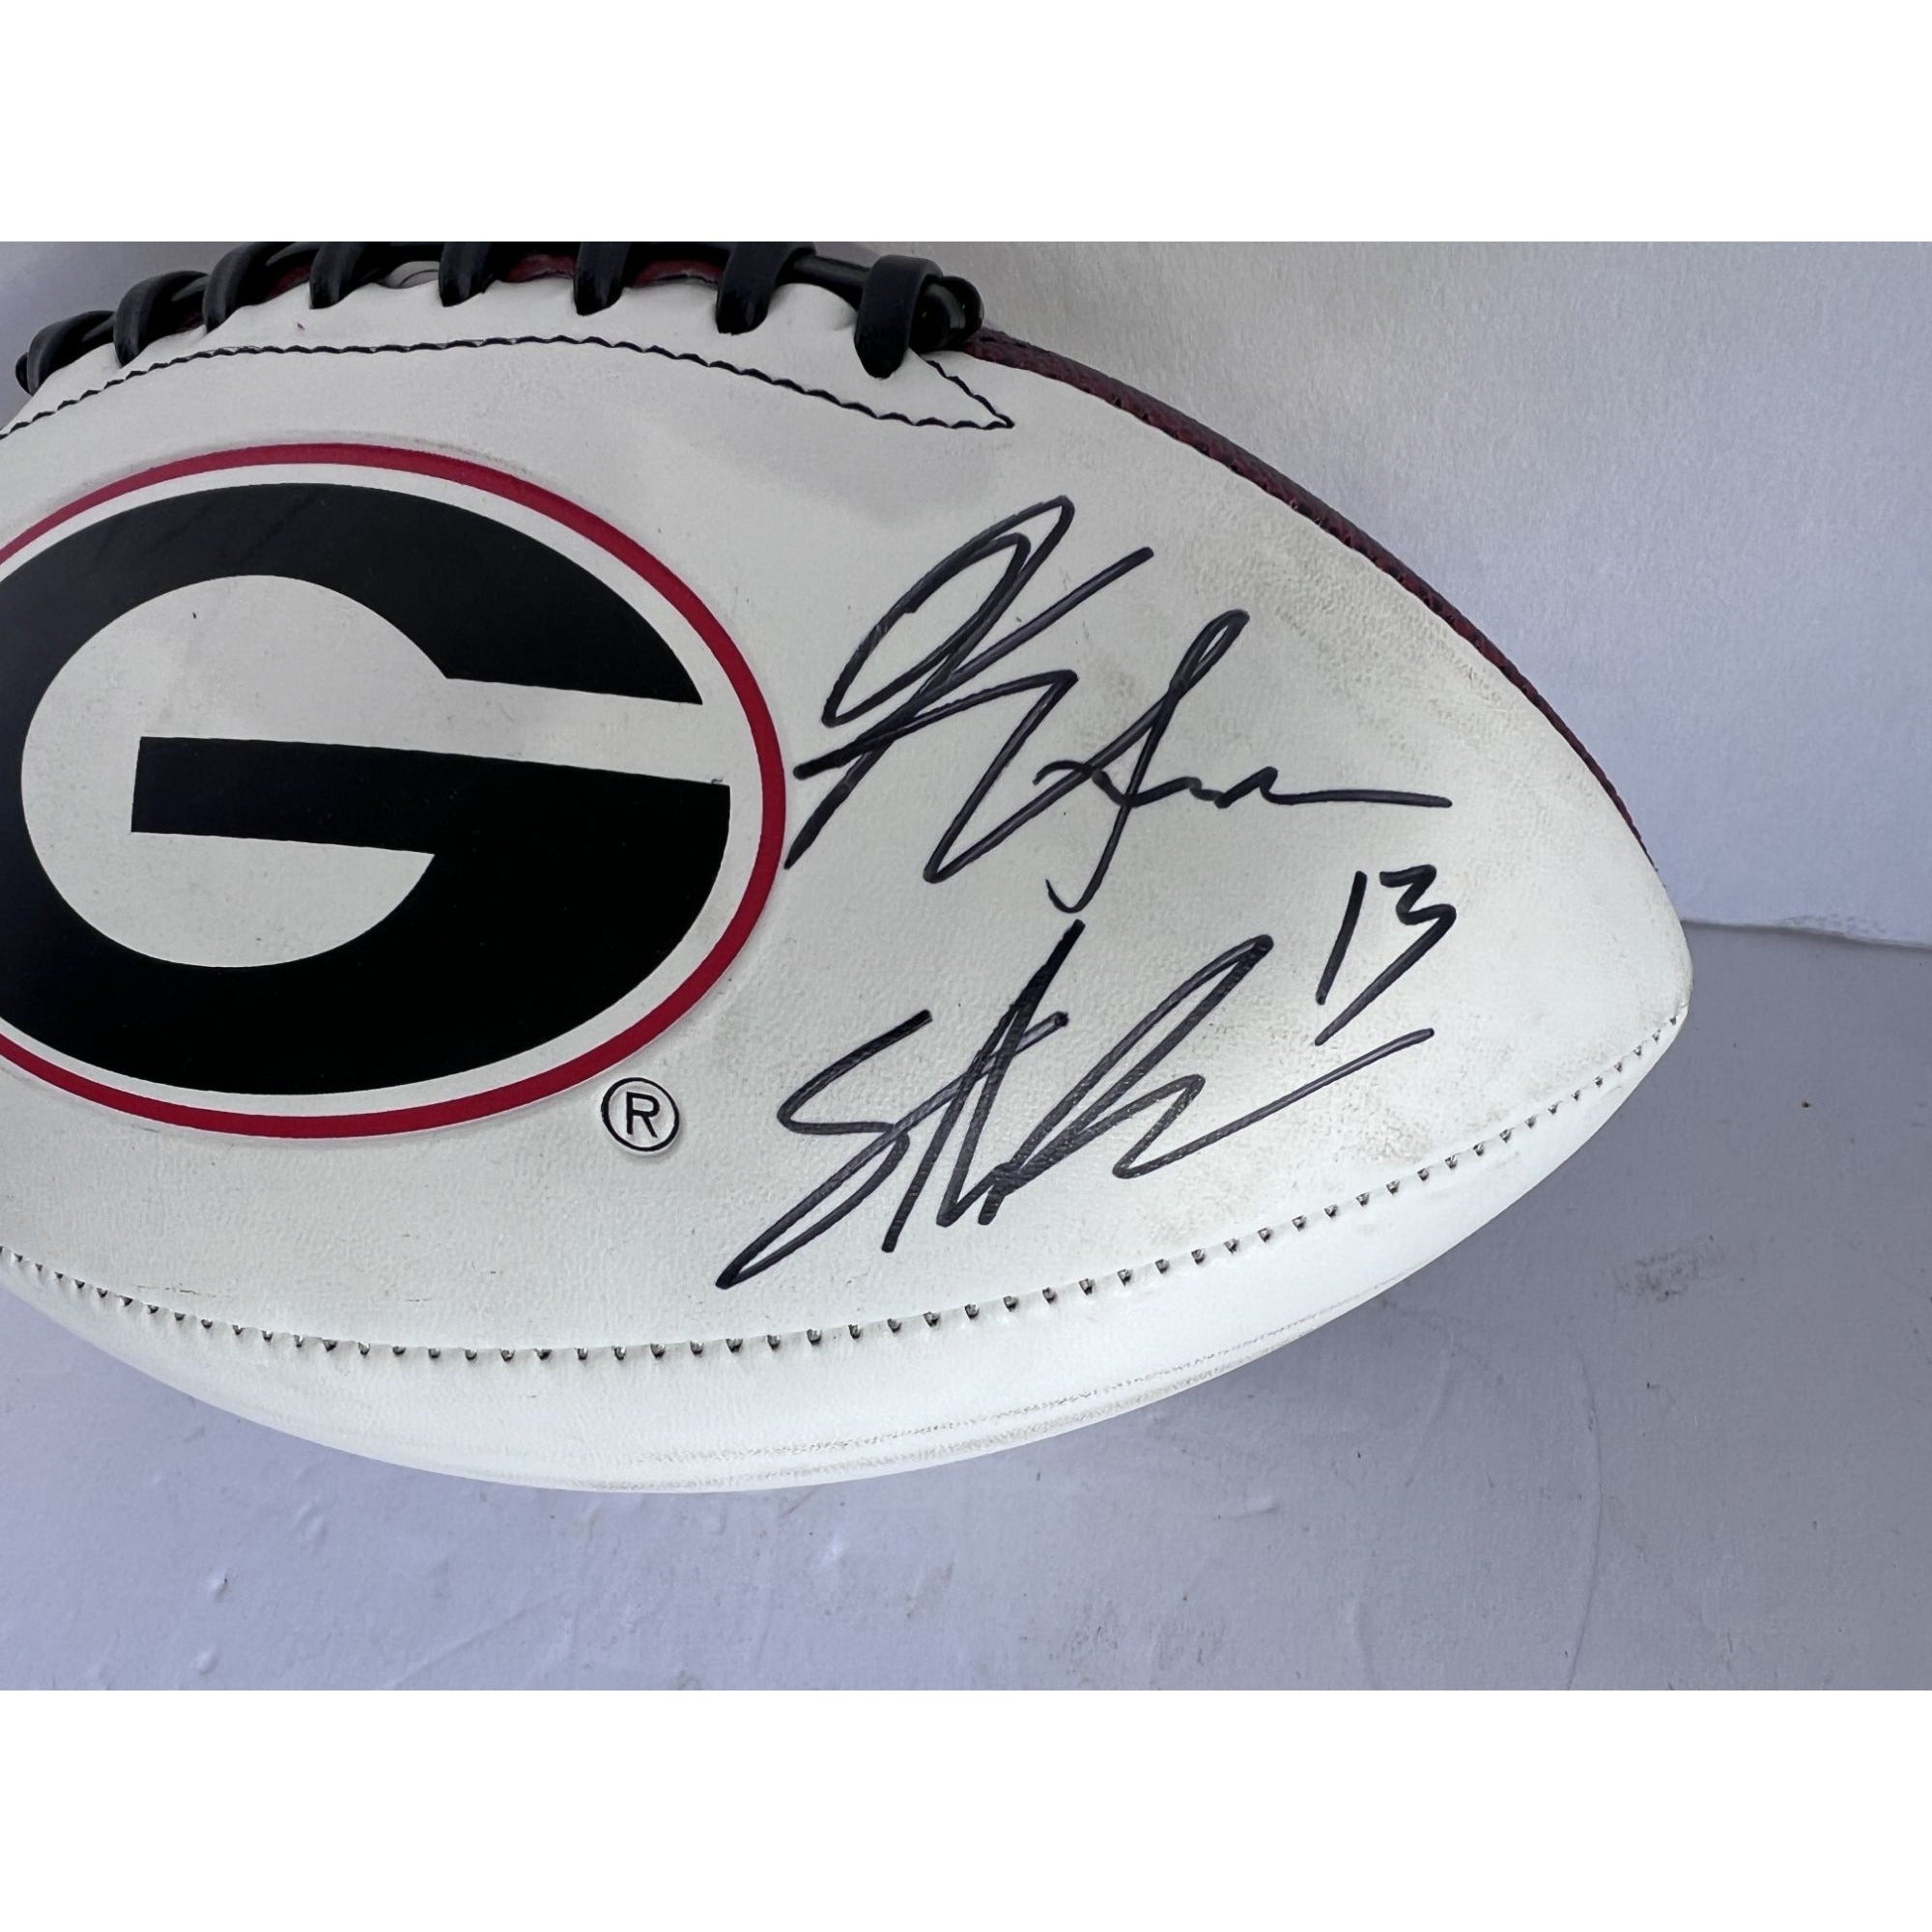 Kirby Smart Stetson Bennett Brock Bowers Georgia Bull Dogs Full size football signed with proof